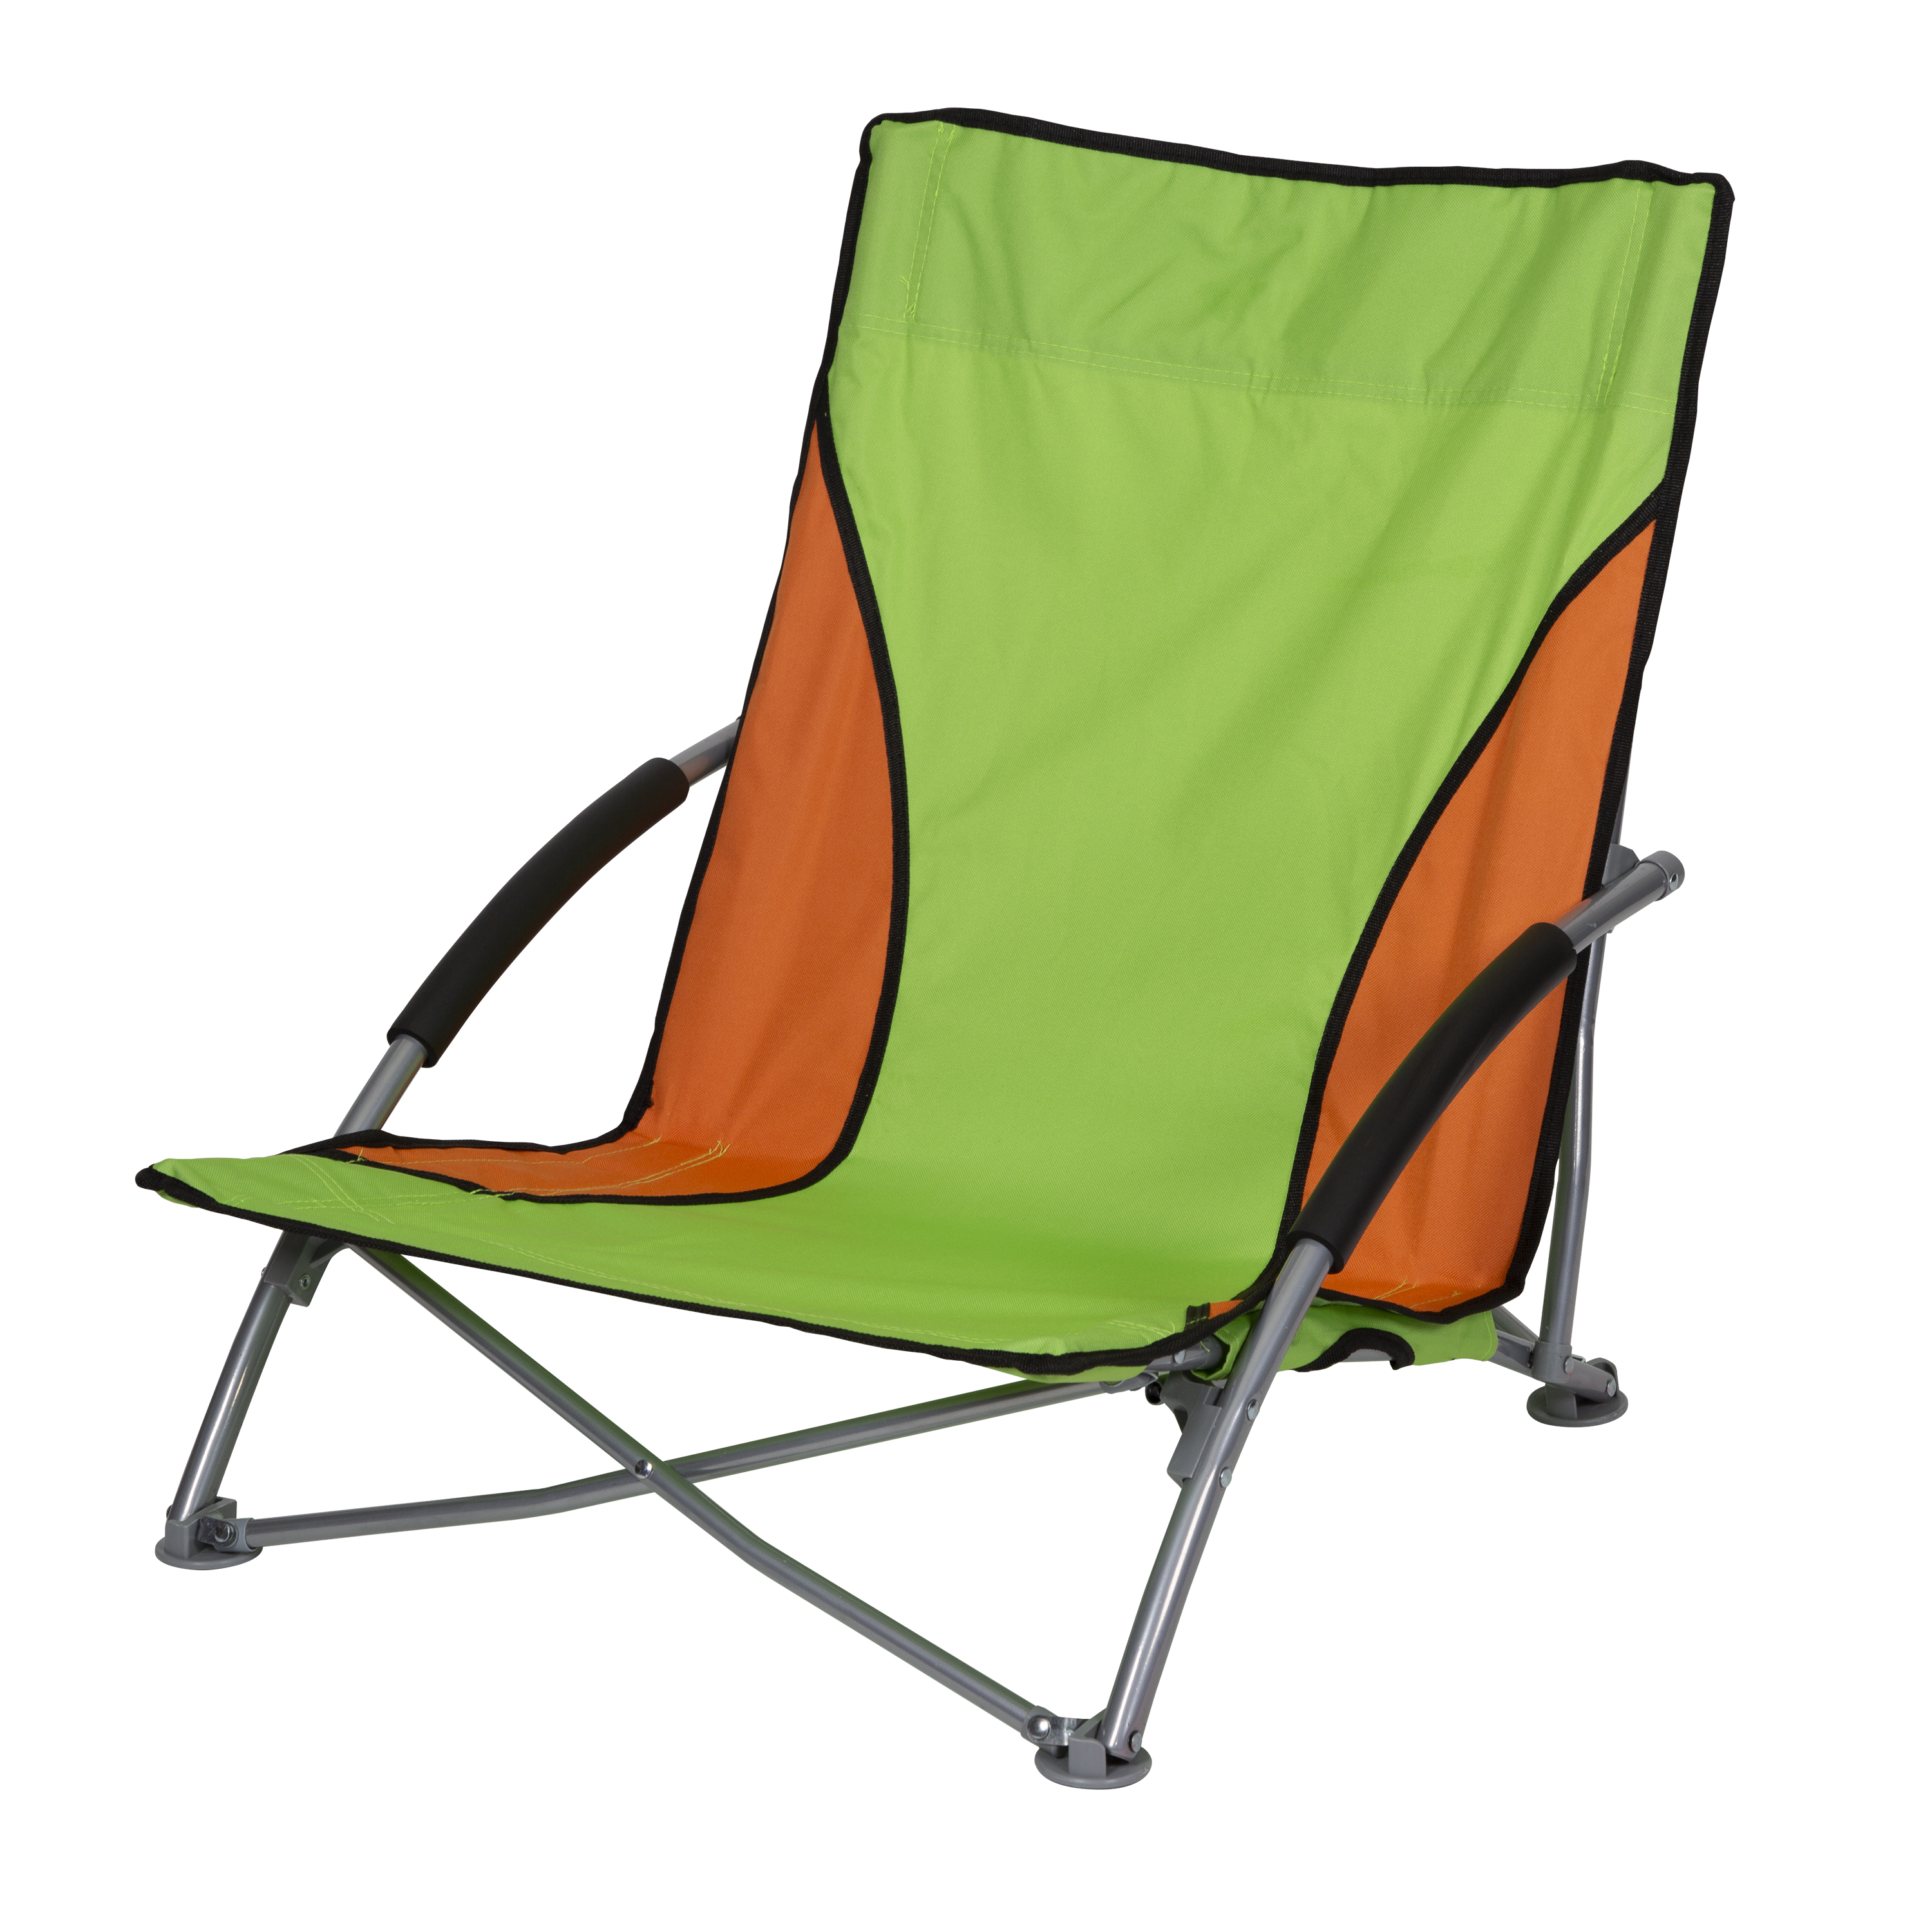 Unique Best Low Profile Beach Chair for Small Space